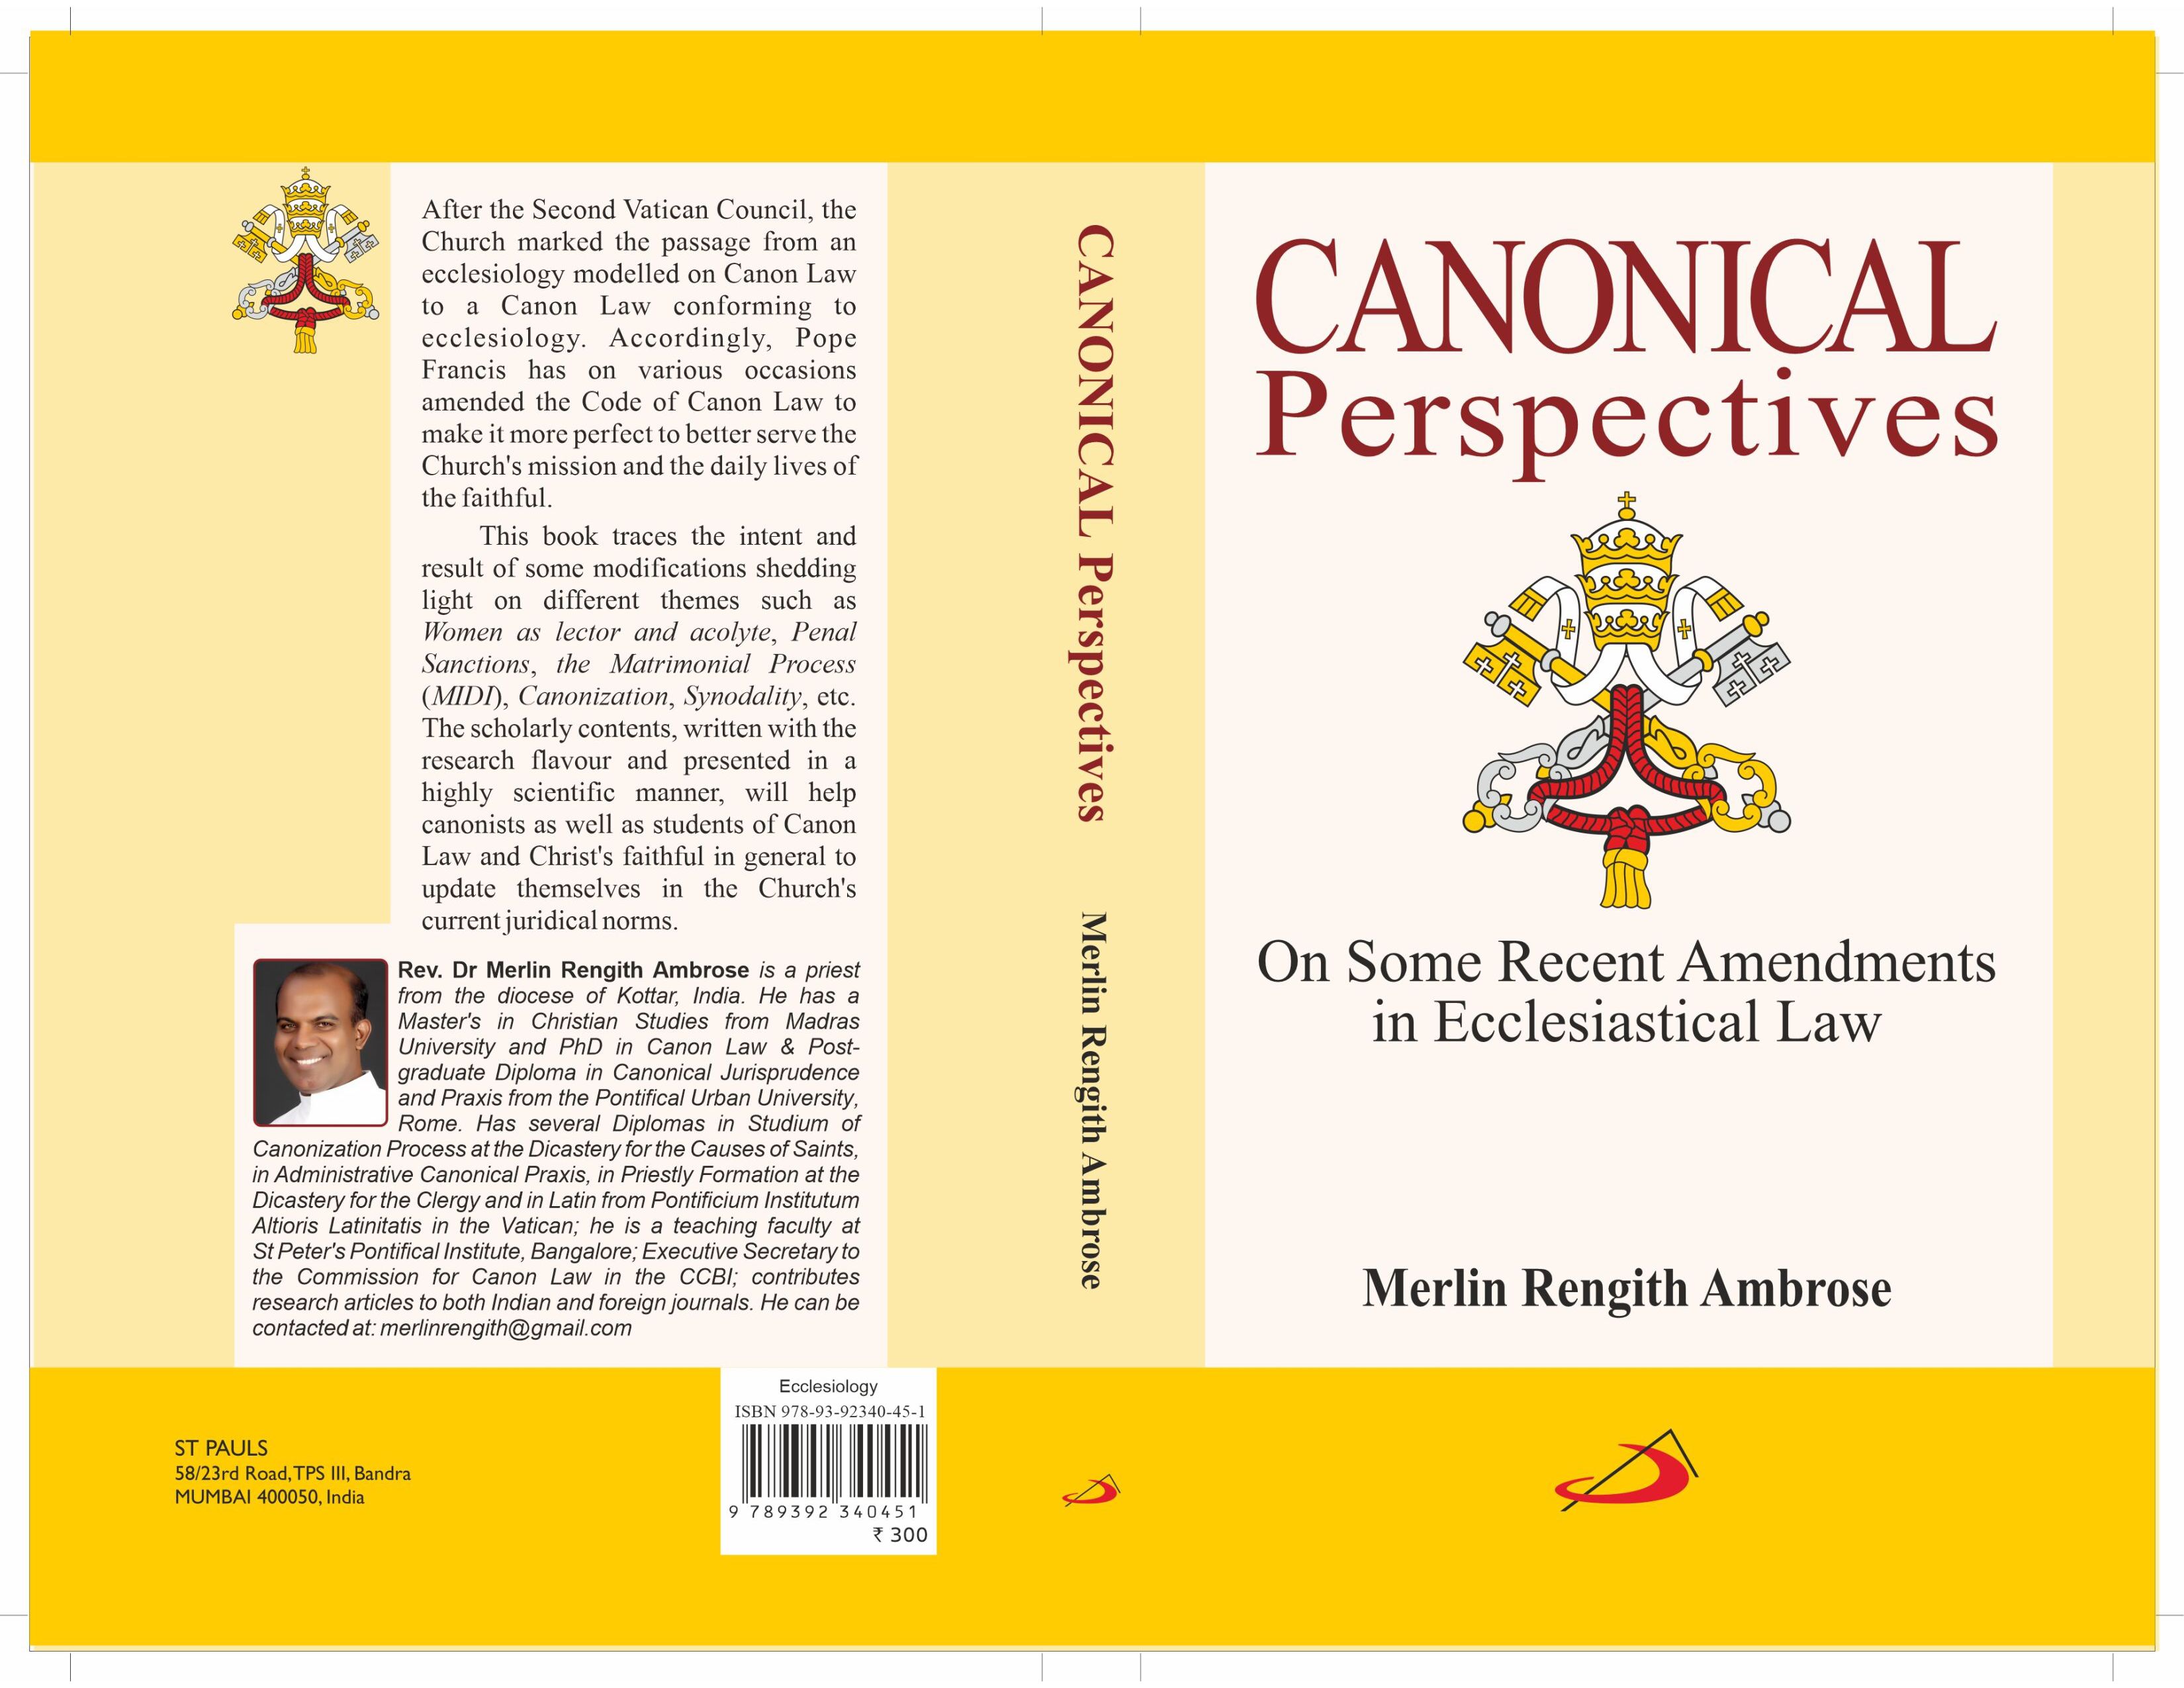 “Canonical Perspectives on Some Recent Amendments in Ecclesiastical Law”